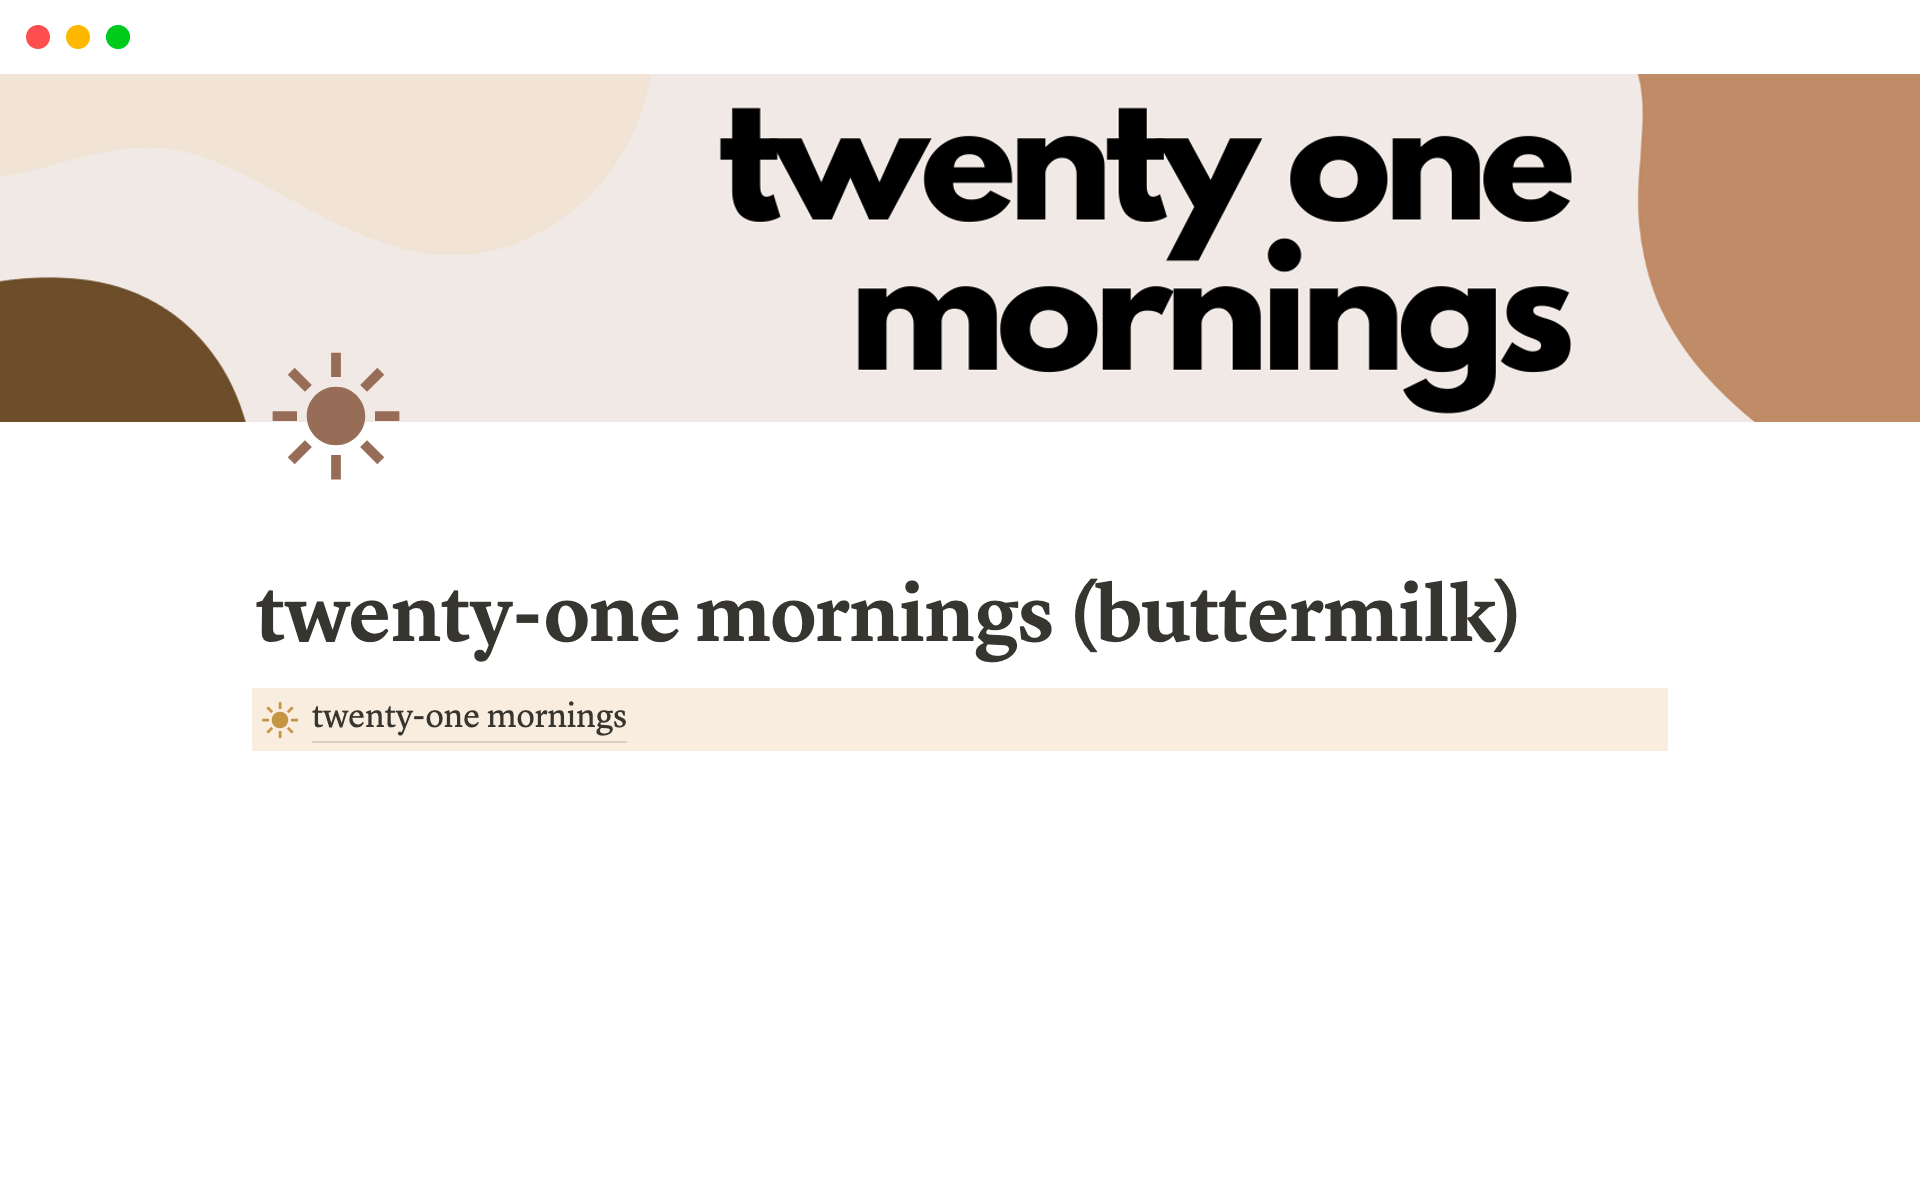 21 Mornings is a template that helps people track their tasks from the hours 5 to 9 am every day for 21 days.